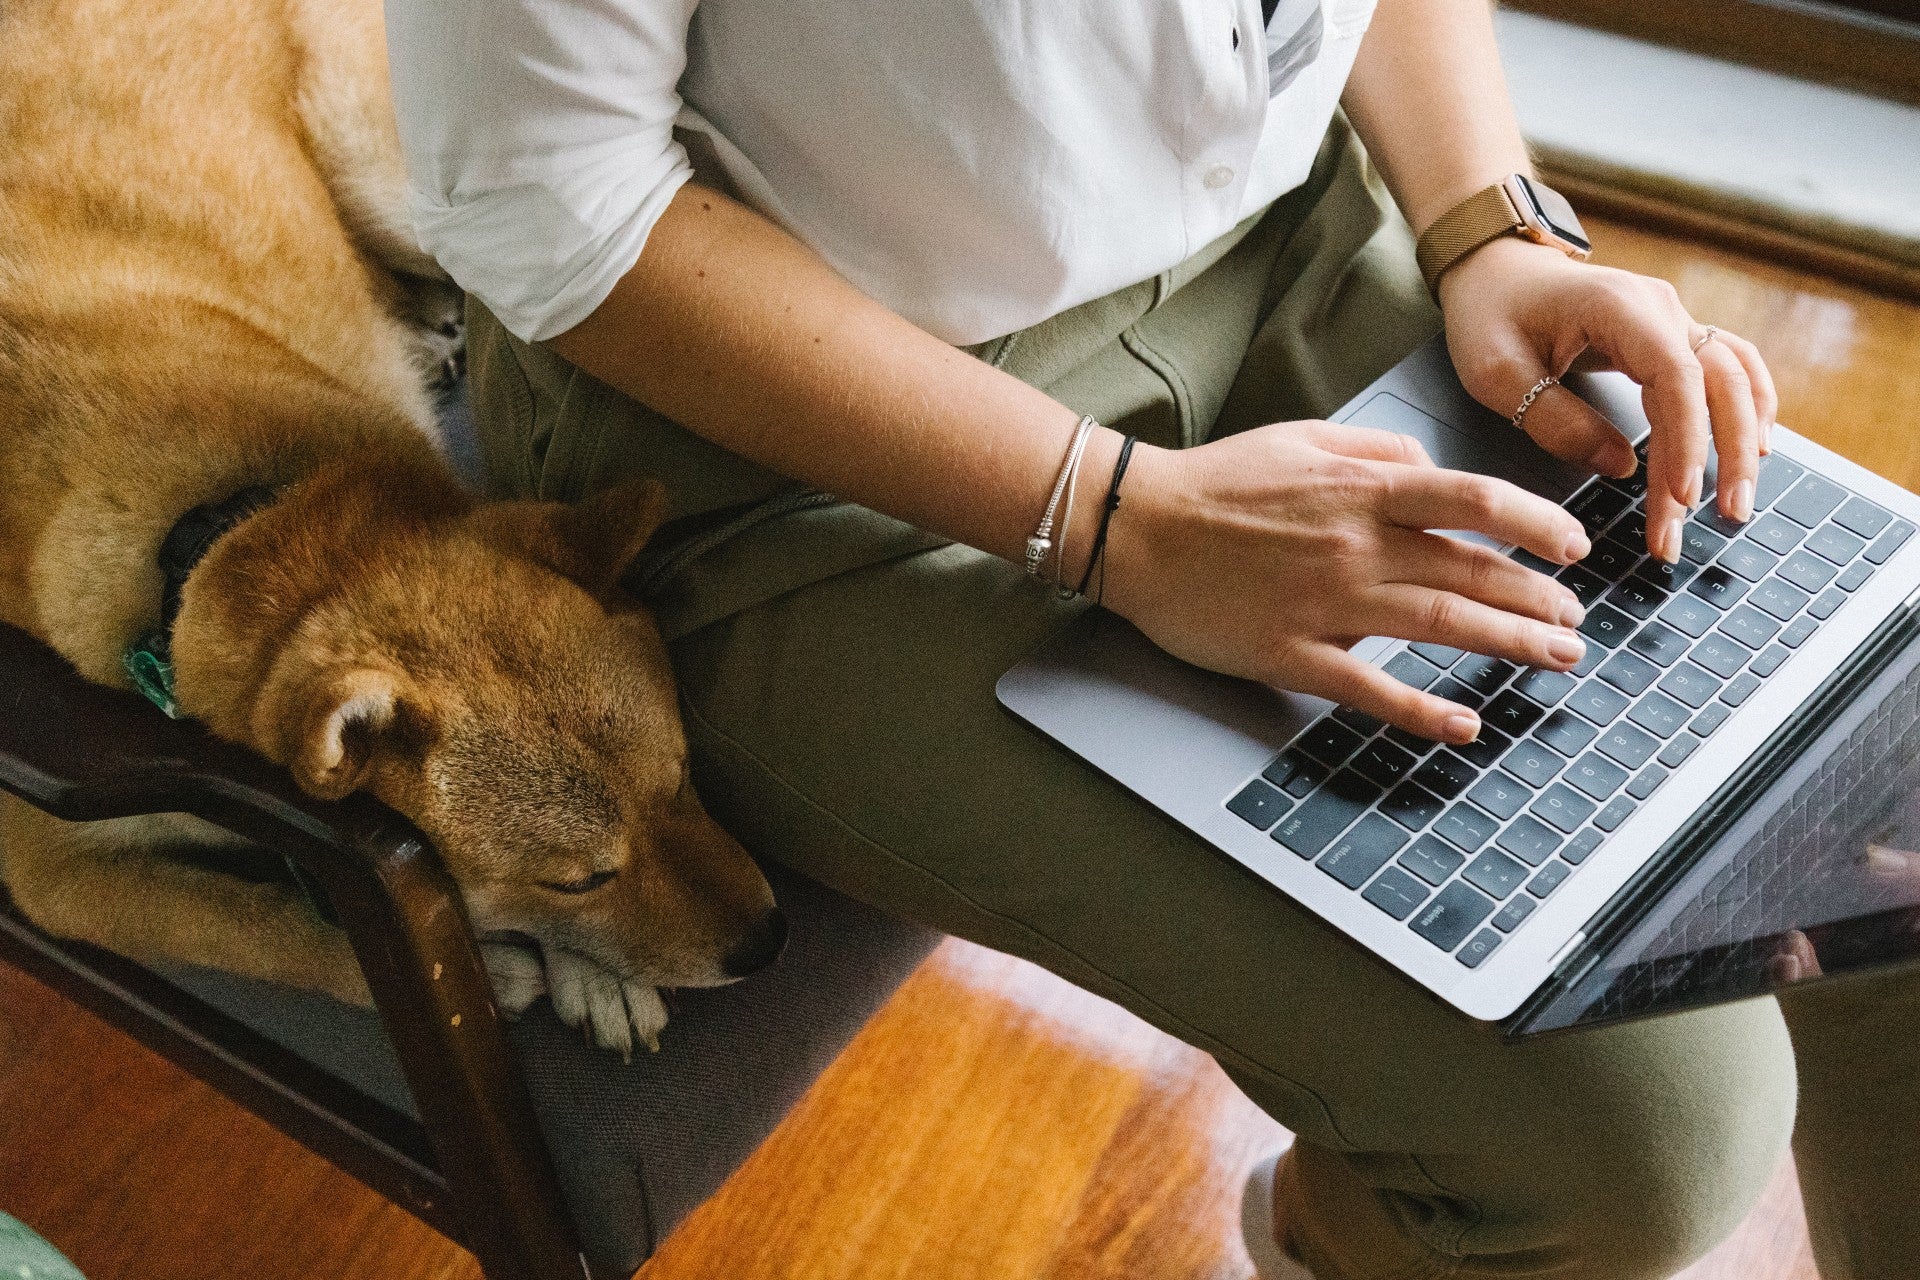 How to Have a Dog and Work Full Time by Meruyert Gonullu from Pexels